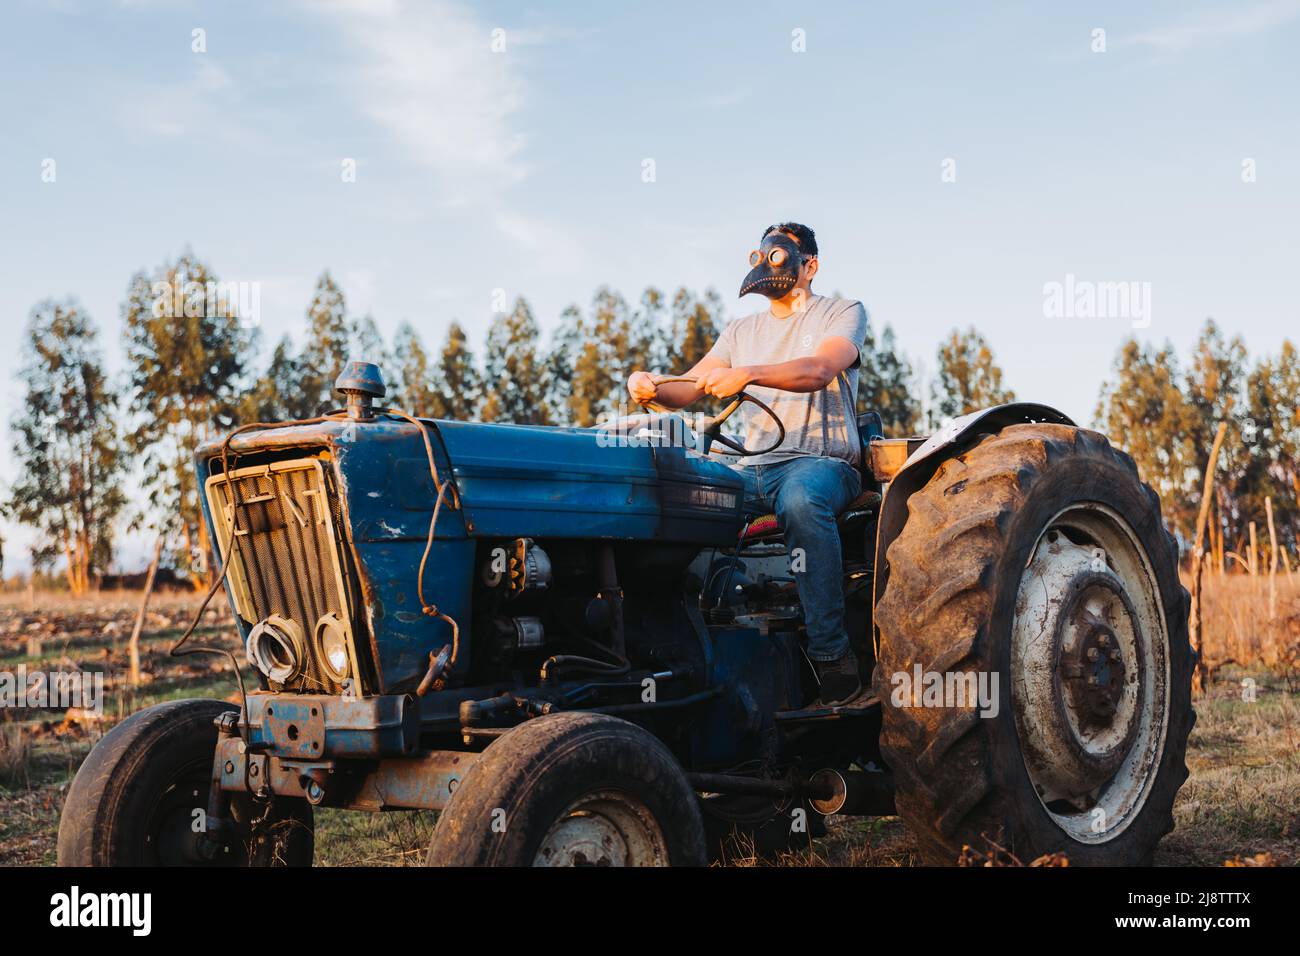 Wide shot of a farmer man with the plague mask on, driving an old tractor in the middle of his farmland.  Stock Photo